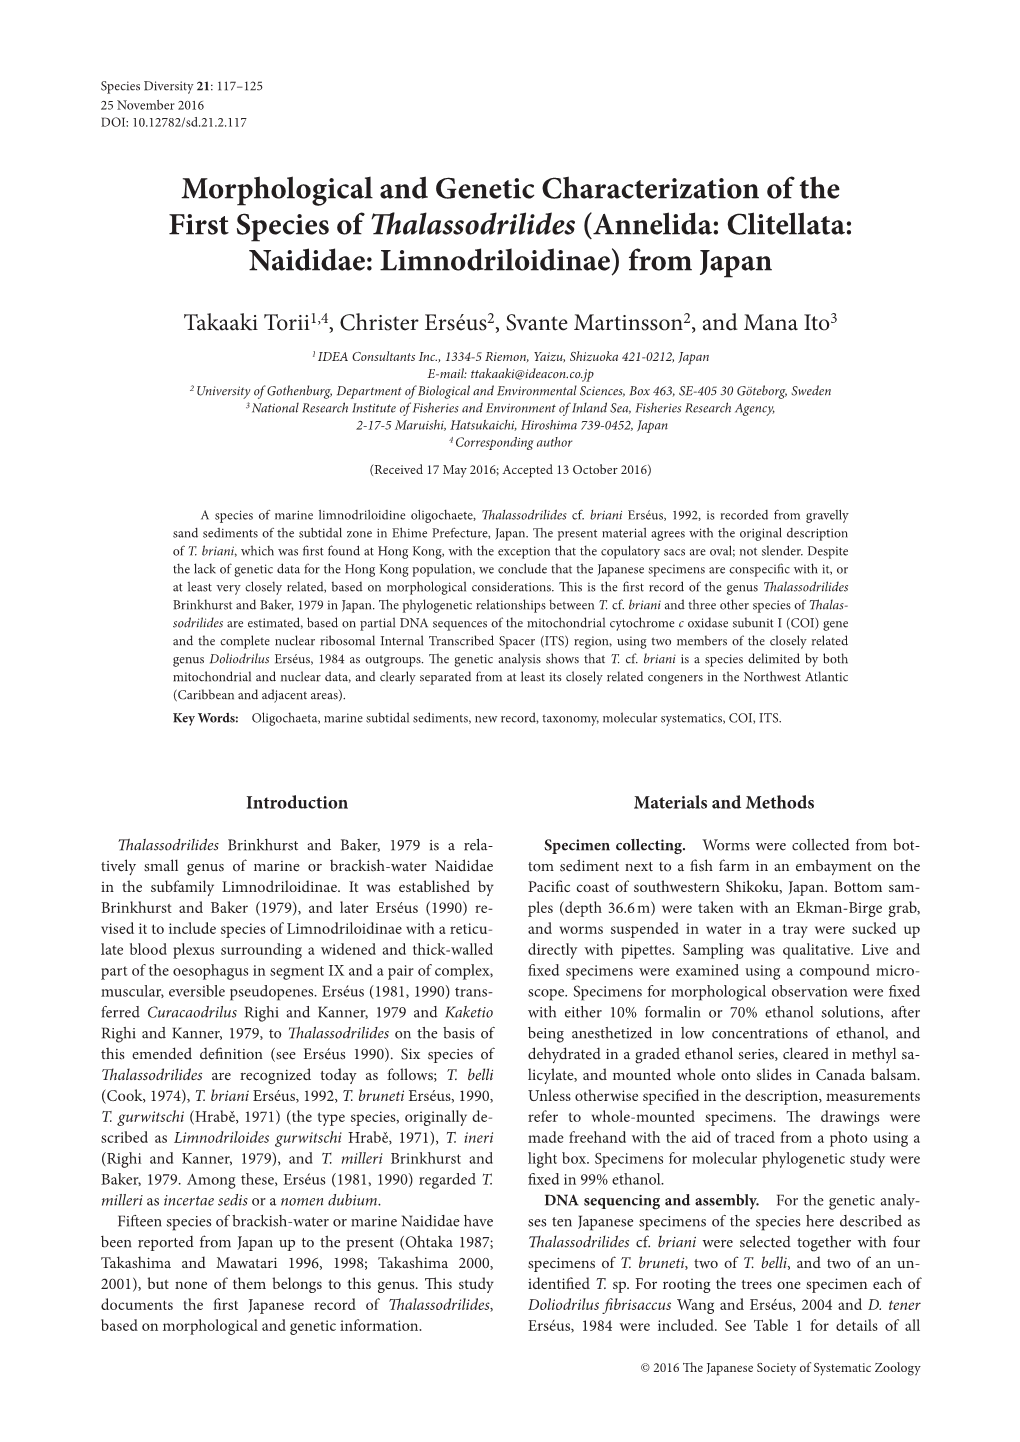 Morphological and Genetic Characterization of the First Species of Thalassodrilides (Annelida: Clitellata: Naididae: Limnodriloidinae) from Japan